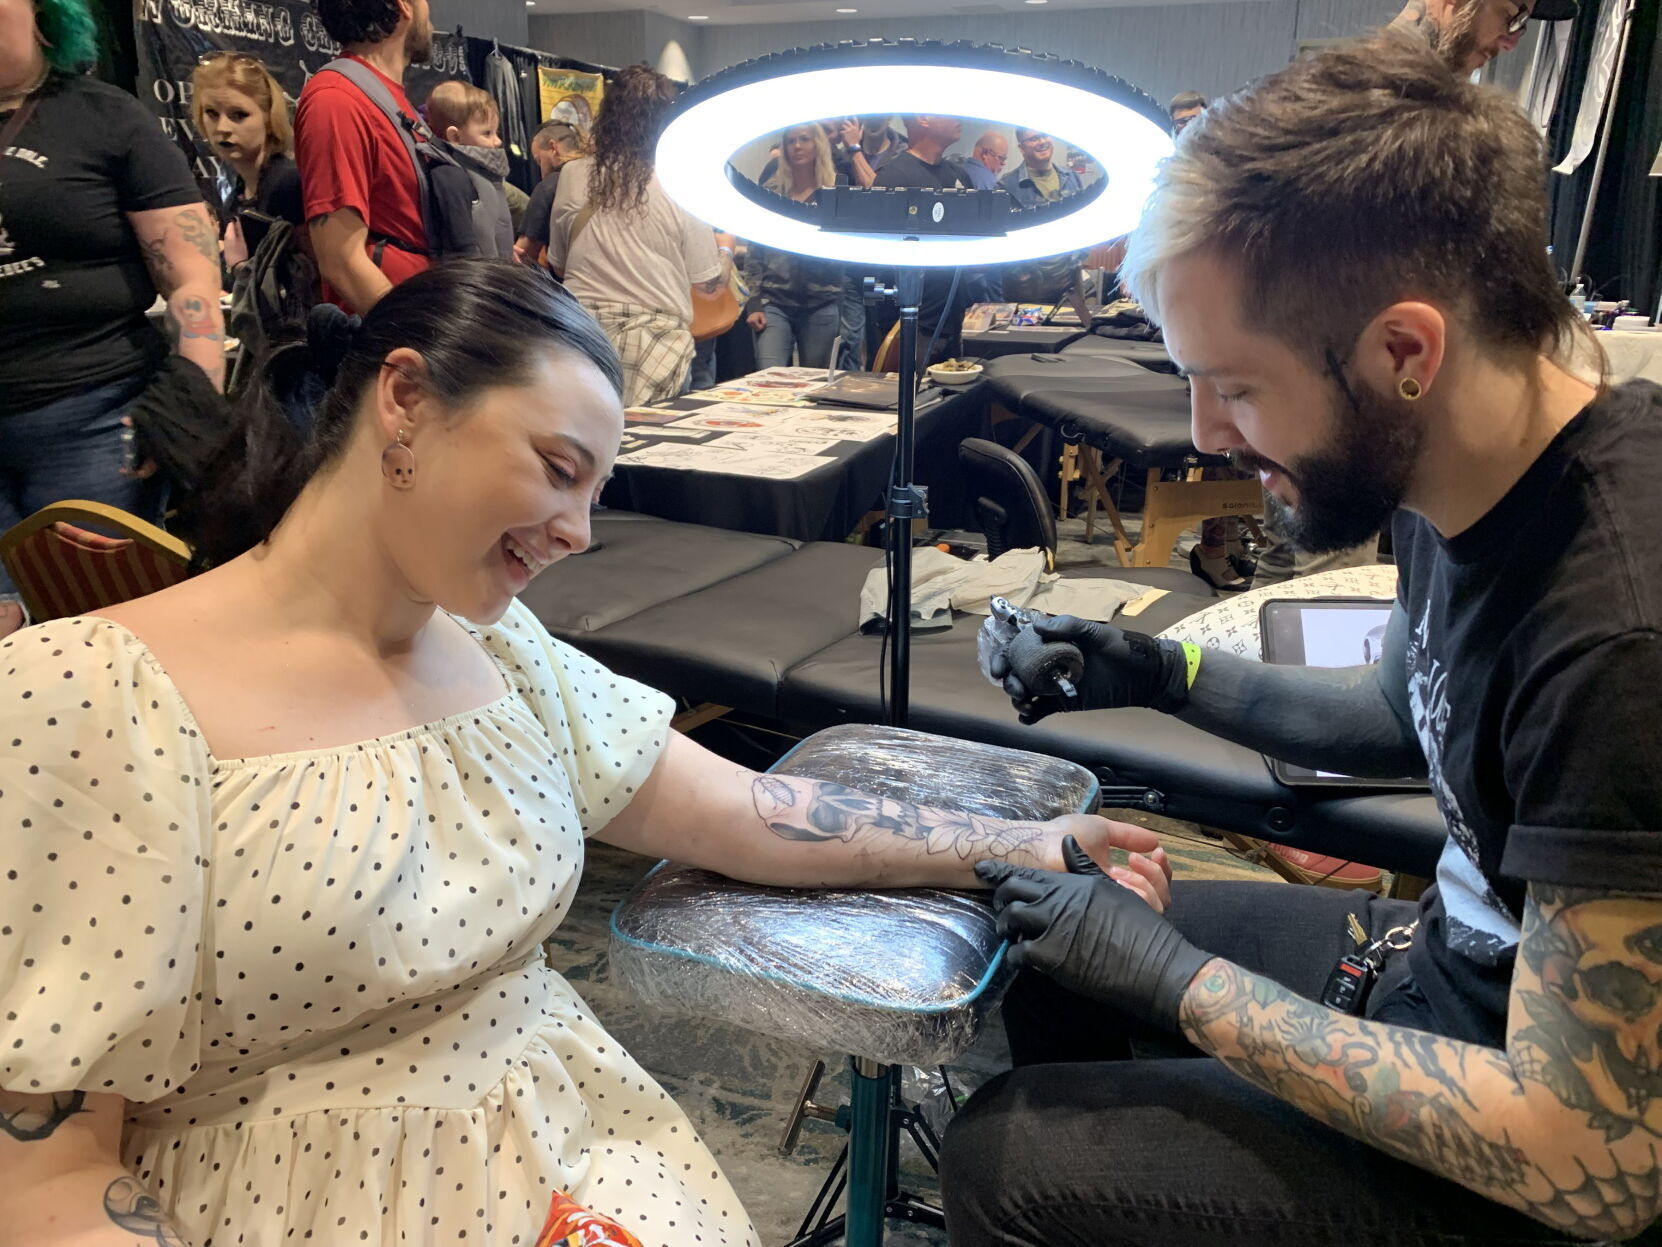 Salt Lake City Tattoo Convention 2023  March 2023  United States  iNKPPL